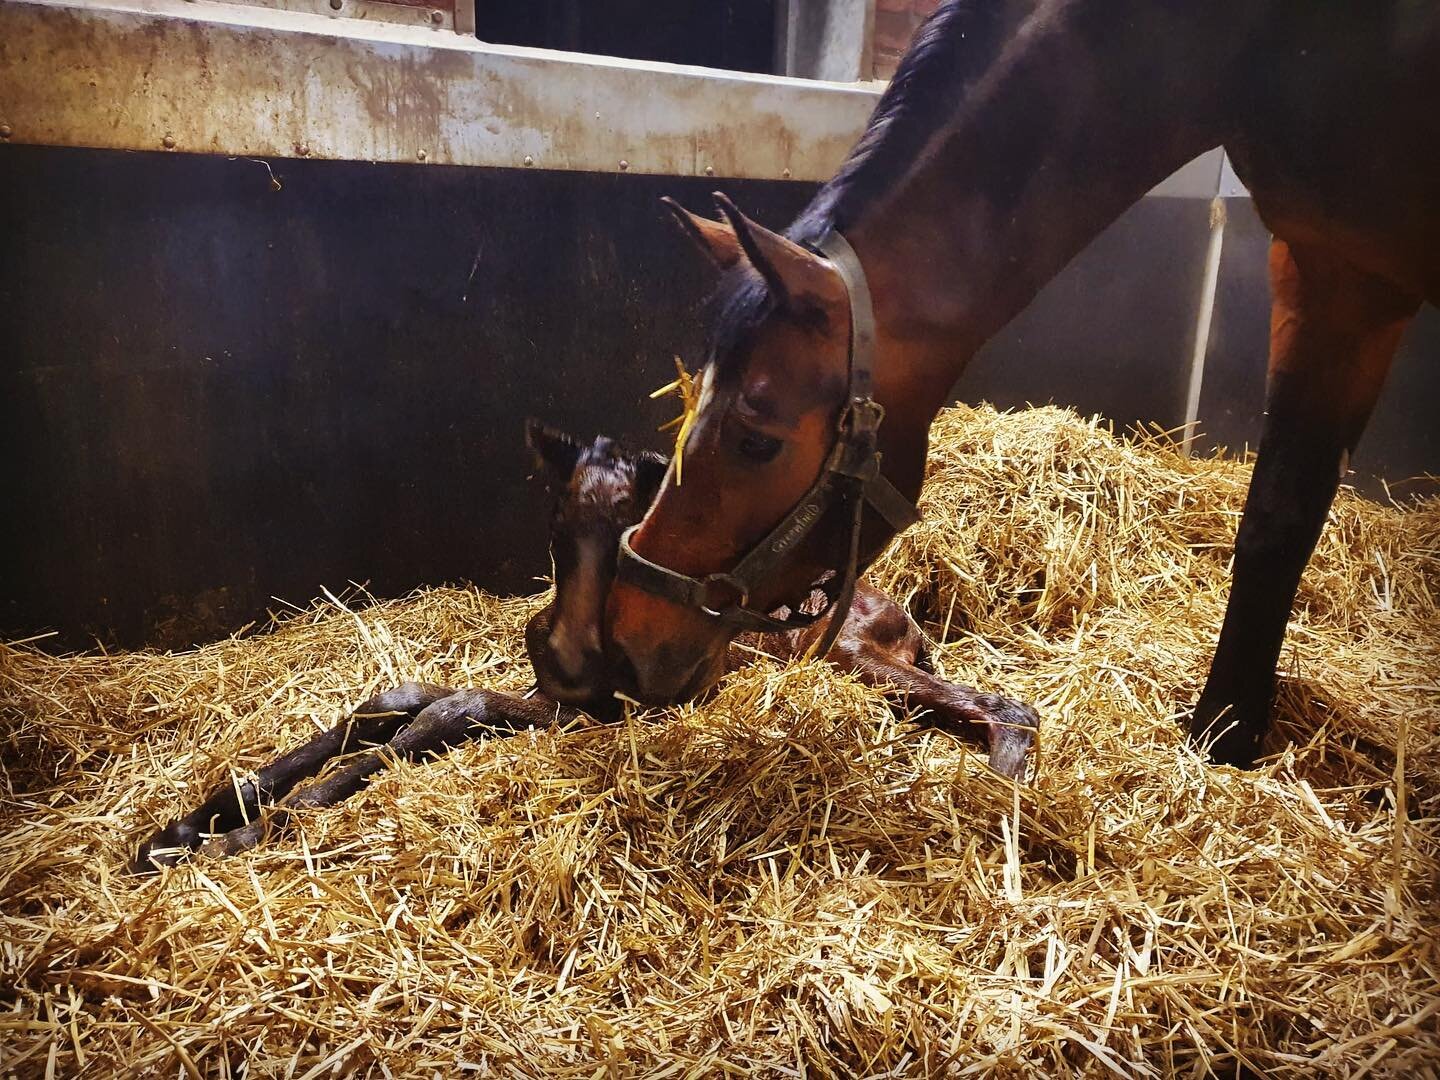 &bull; Welcome to the world babygirl! 🍼❤️ &bull; So excited with our first born filly by Glenfiddich x Rosengold x Rhodium &bull; Name has to start with an &ldquo;S&rdquo;! Any ideas?? &bull;
&bull;
&bull;
&bull;
&bull;
&bull;
&bull;
&bull;
&bull;
&